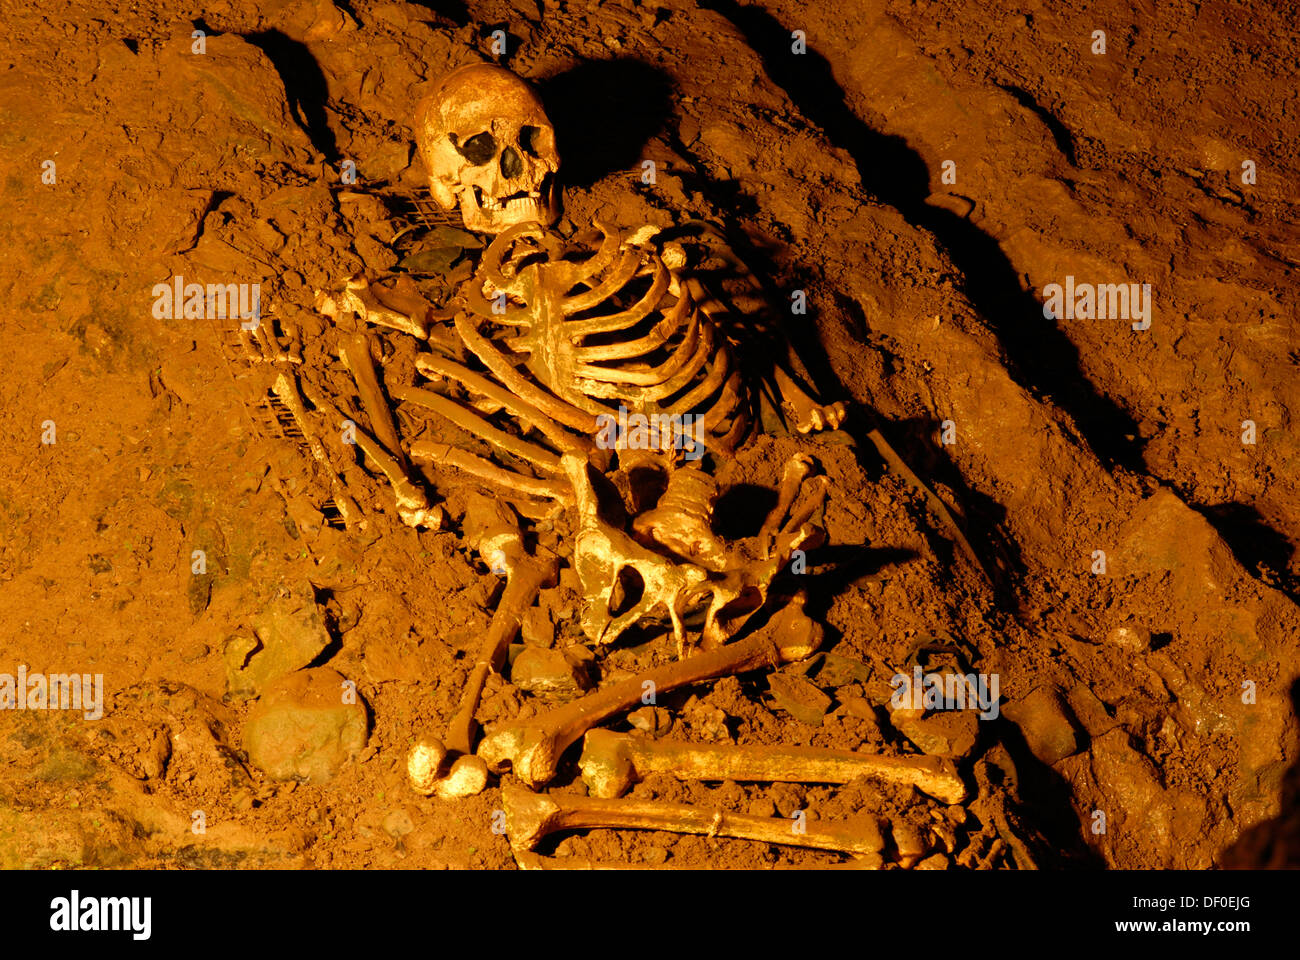 Skull and skeleton from the stone age, Cheddar Man Museum of Prehistory, Cheddar, Somerset, England, United Kingdom, Europe Stock Photo